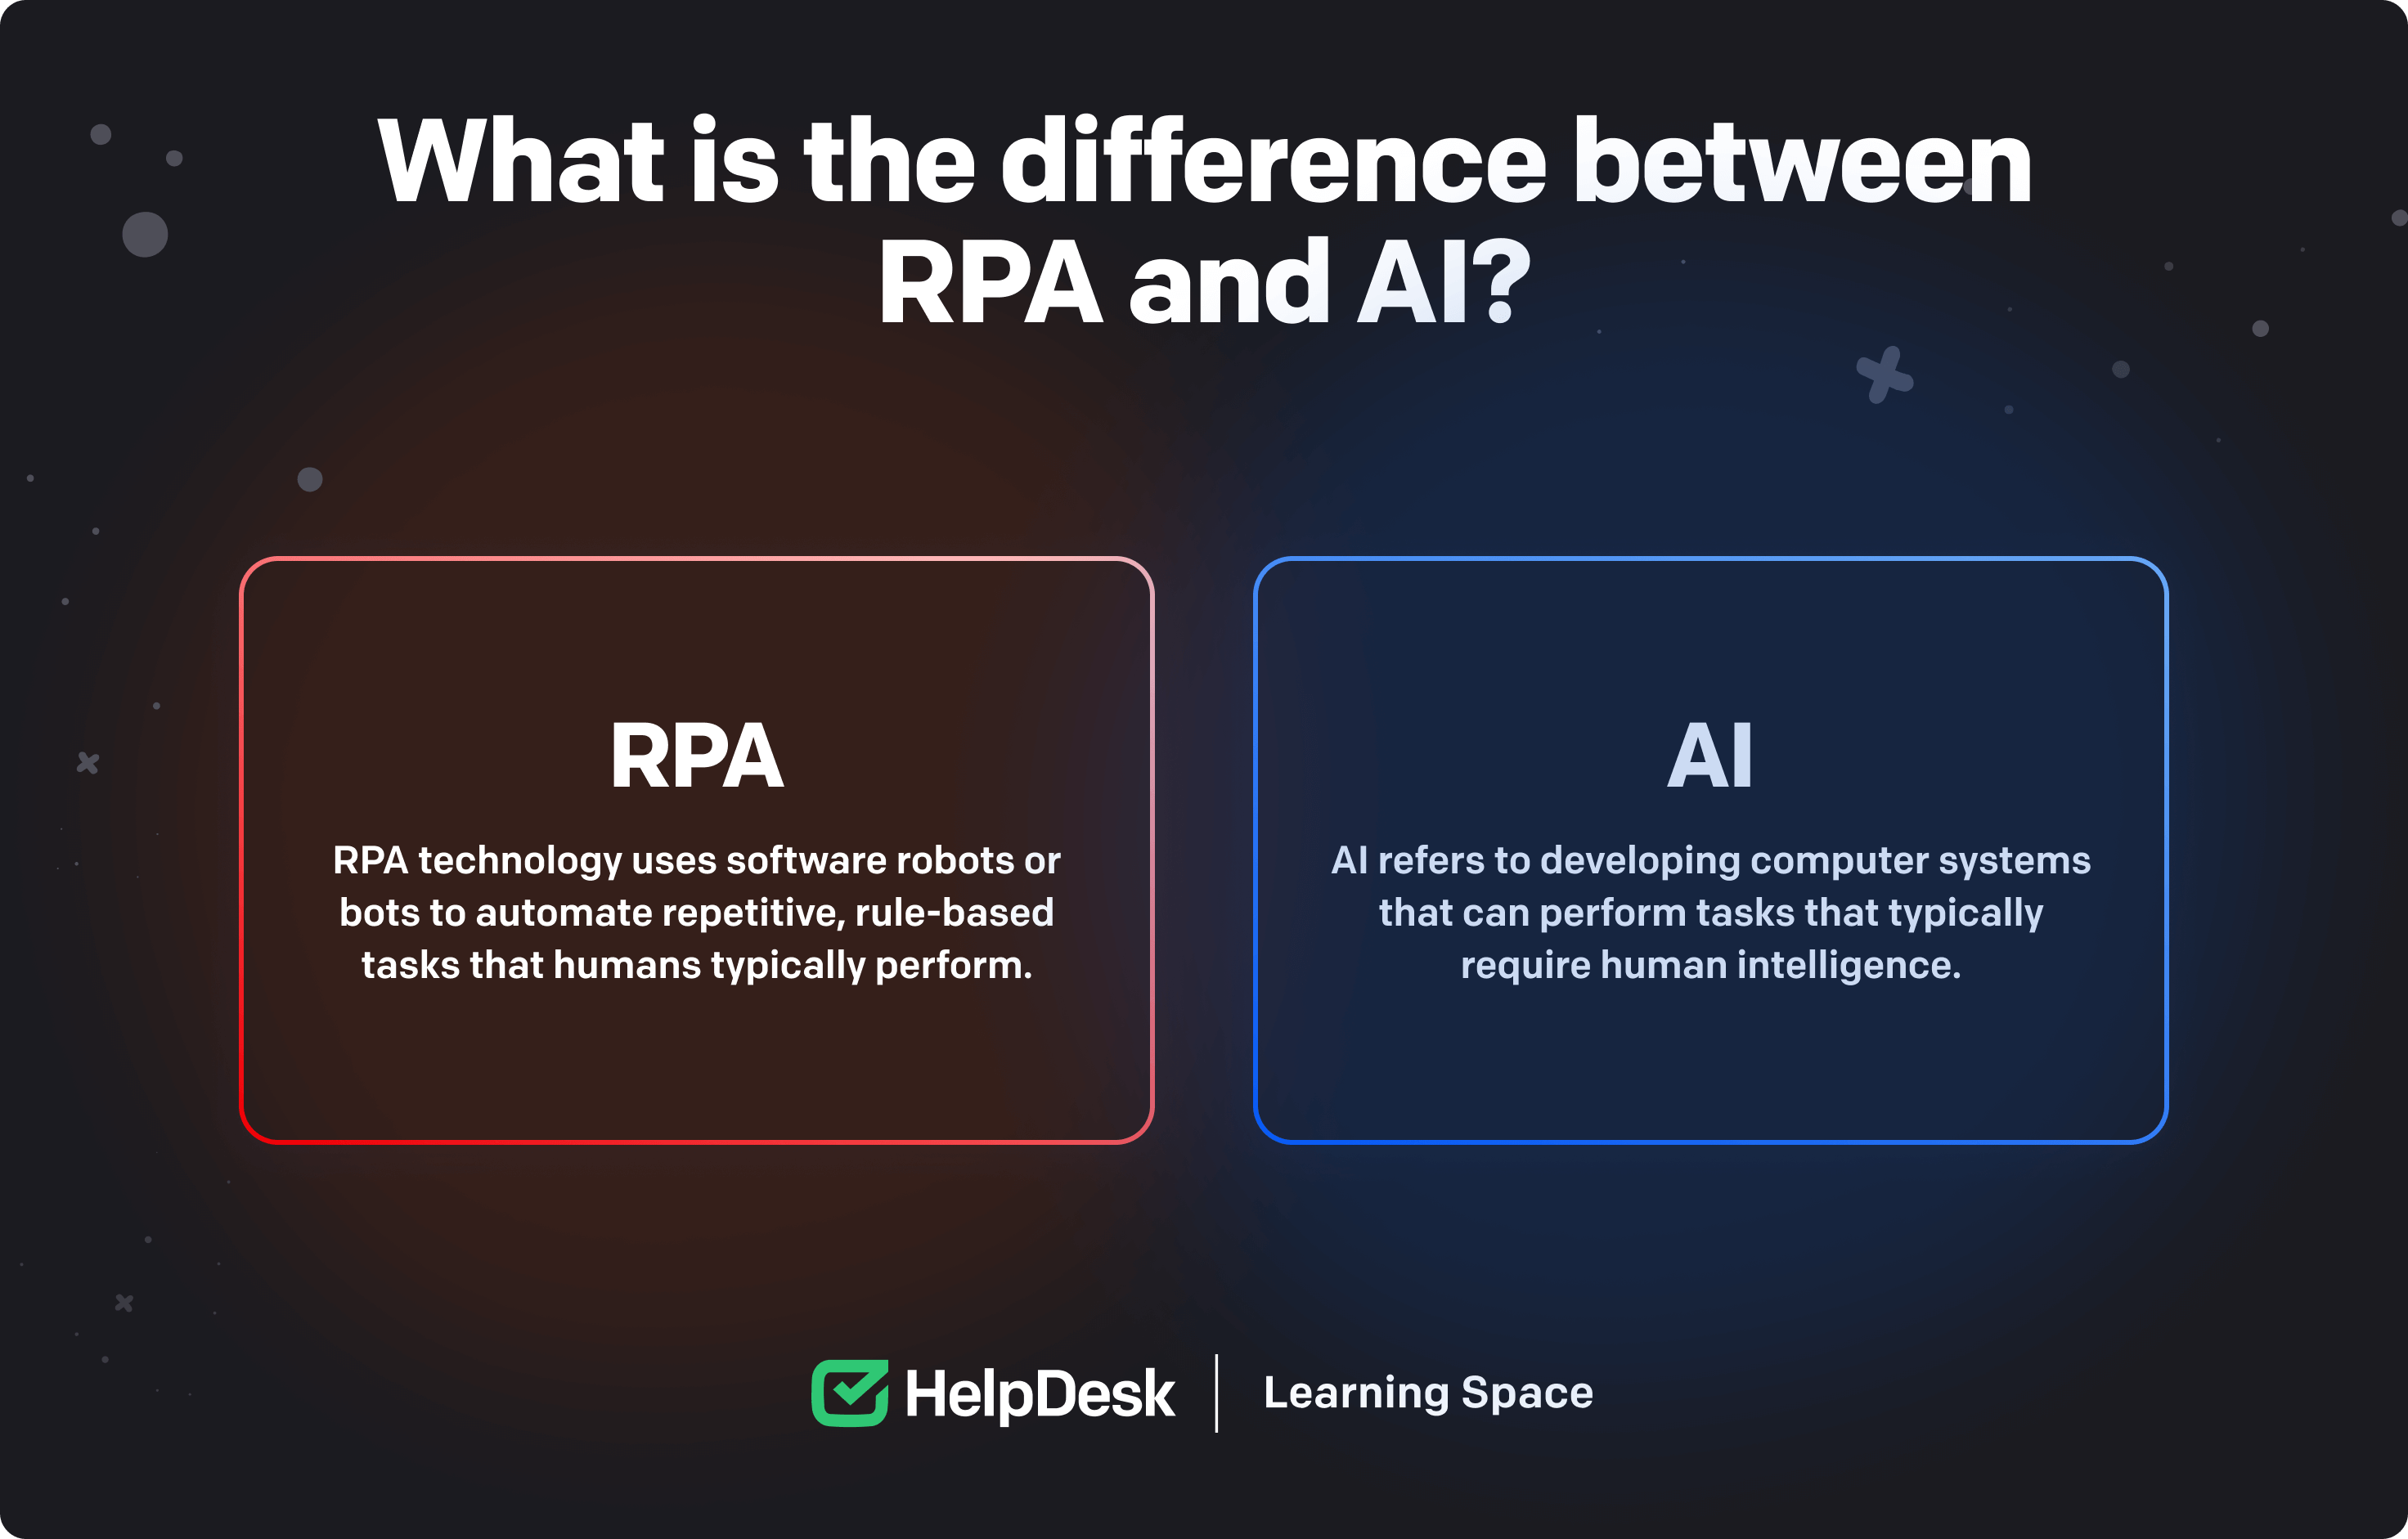 The difference between RPA and AI